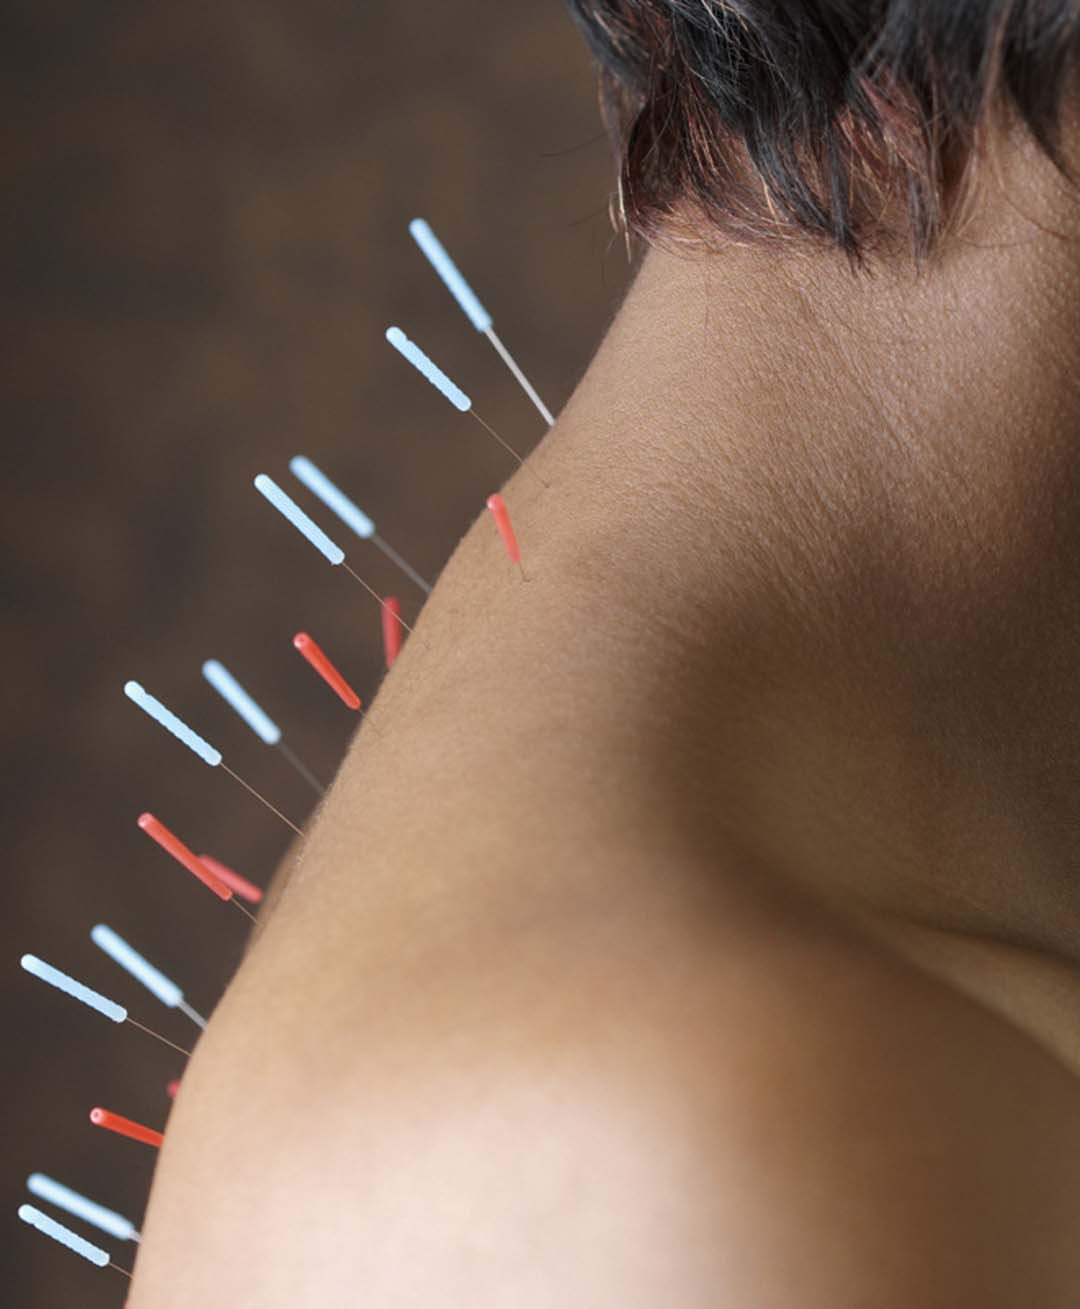 acupuncture near me